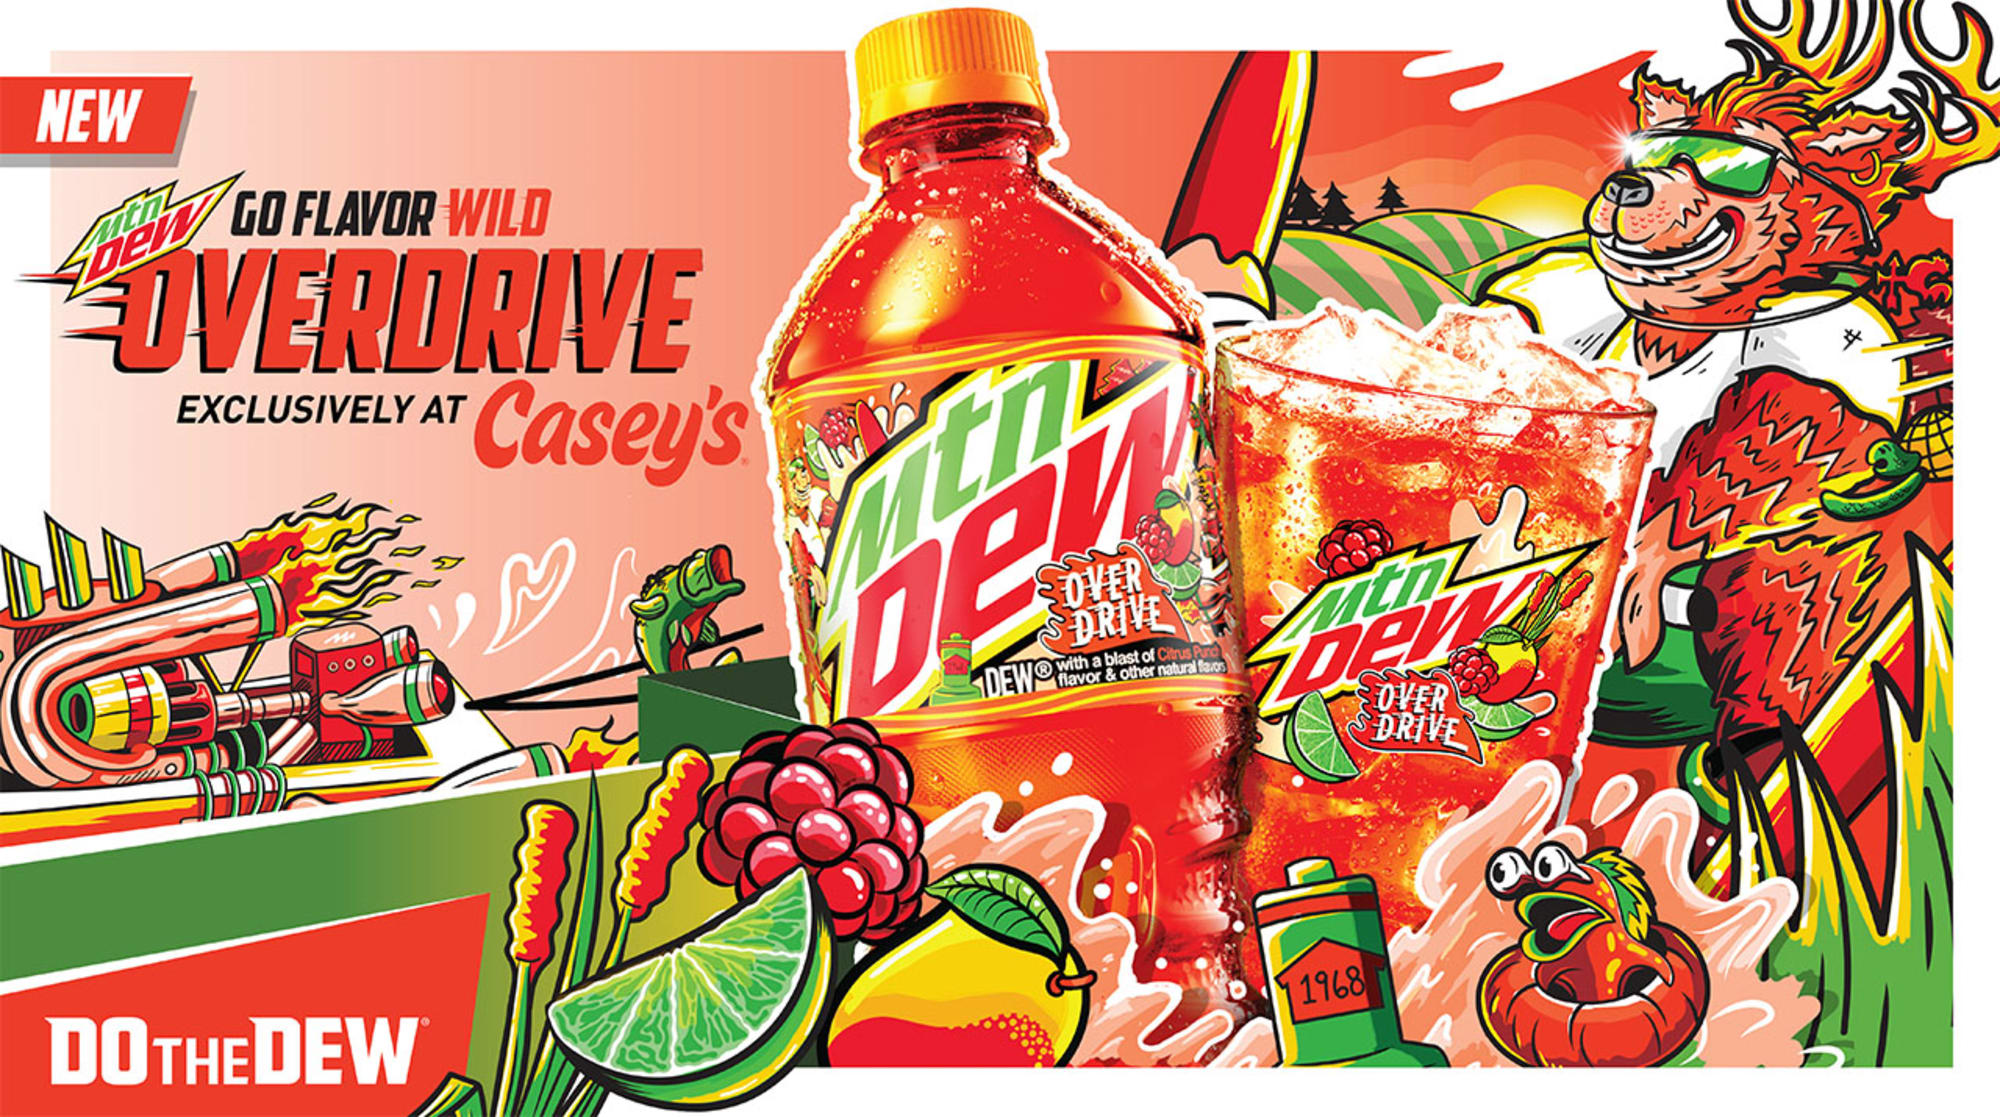 The new MTN DEW OVERDRIVE debuts at Casey's